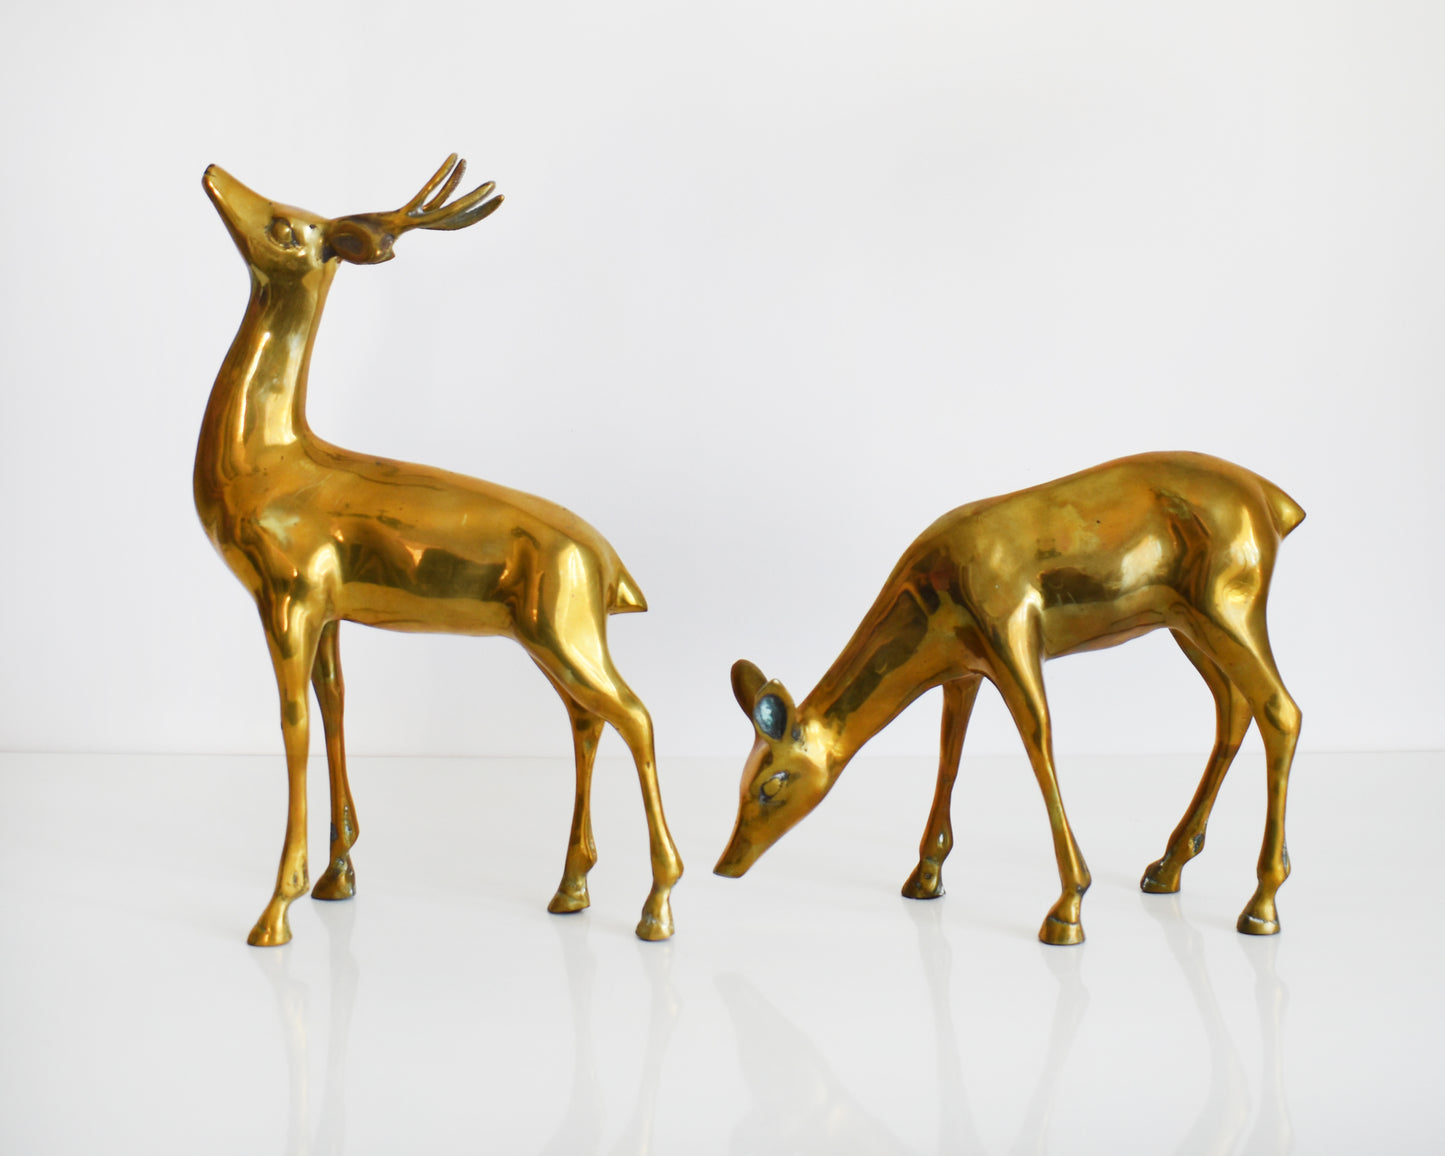 A pair of two large vintage brass deer figurines. One buck and one doe make up this collection, with the buck standing upright displaying his antlers and the doe is grazing on the ground.